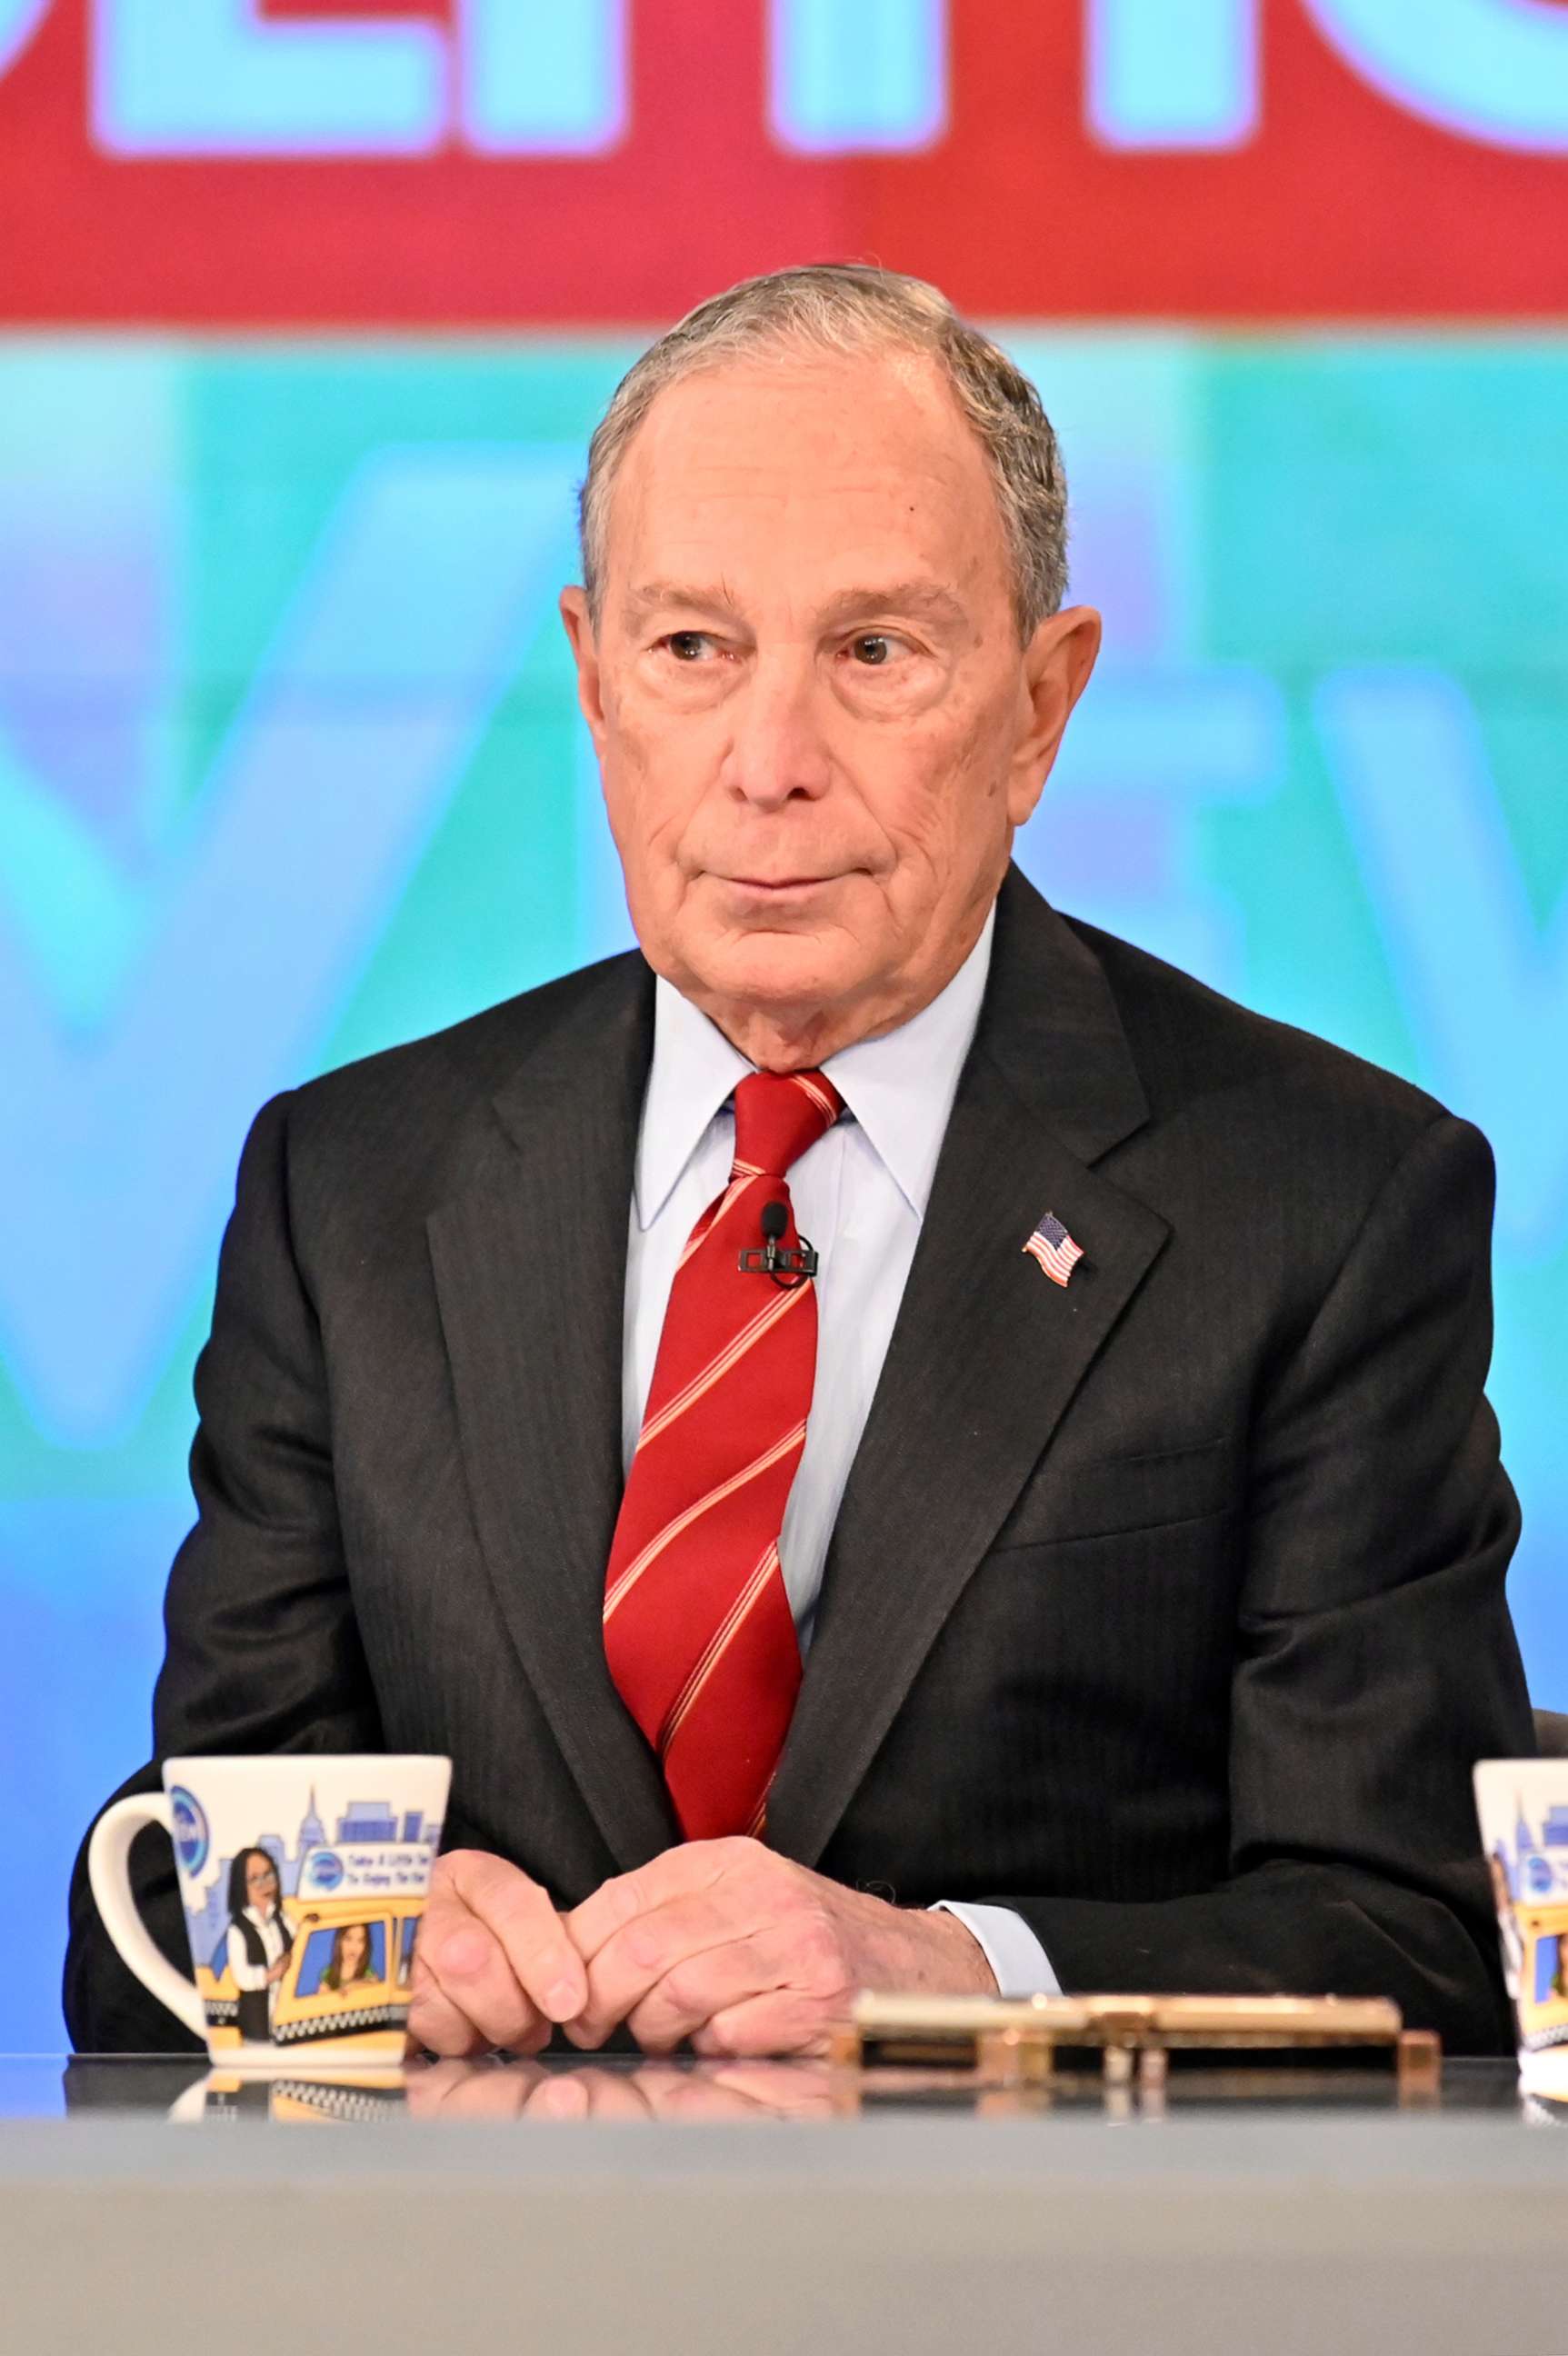 PHOTO: Michael Bloomberg appear on "The View," Jan. 15, 2020.